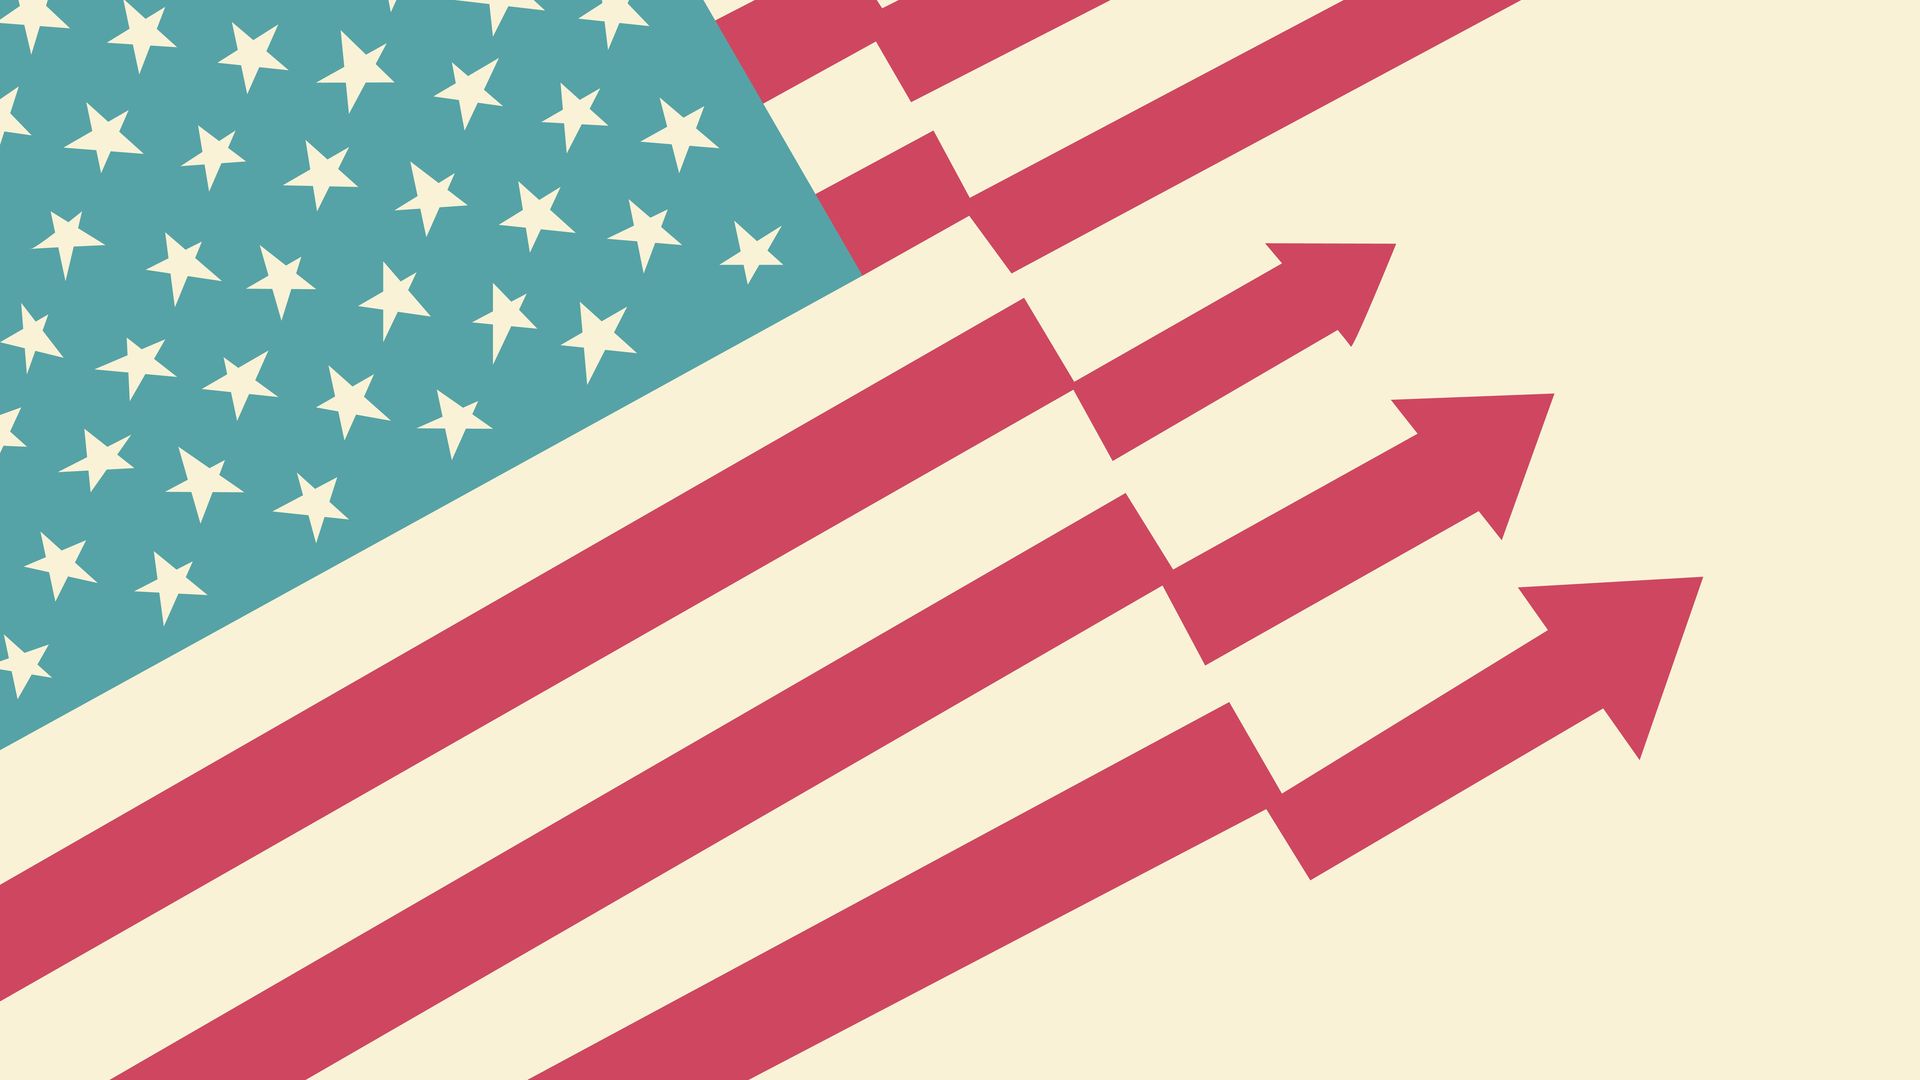 Illustration of an American flag with three of the stripes doubling as upward trending chart lines.